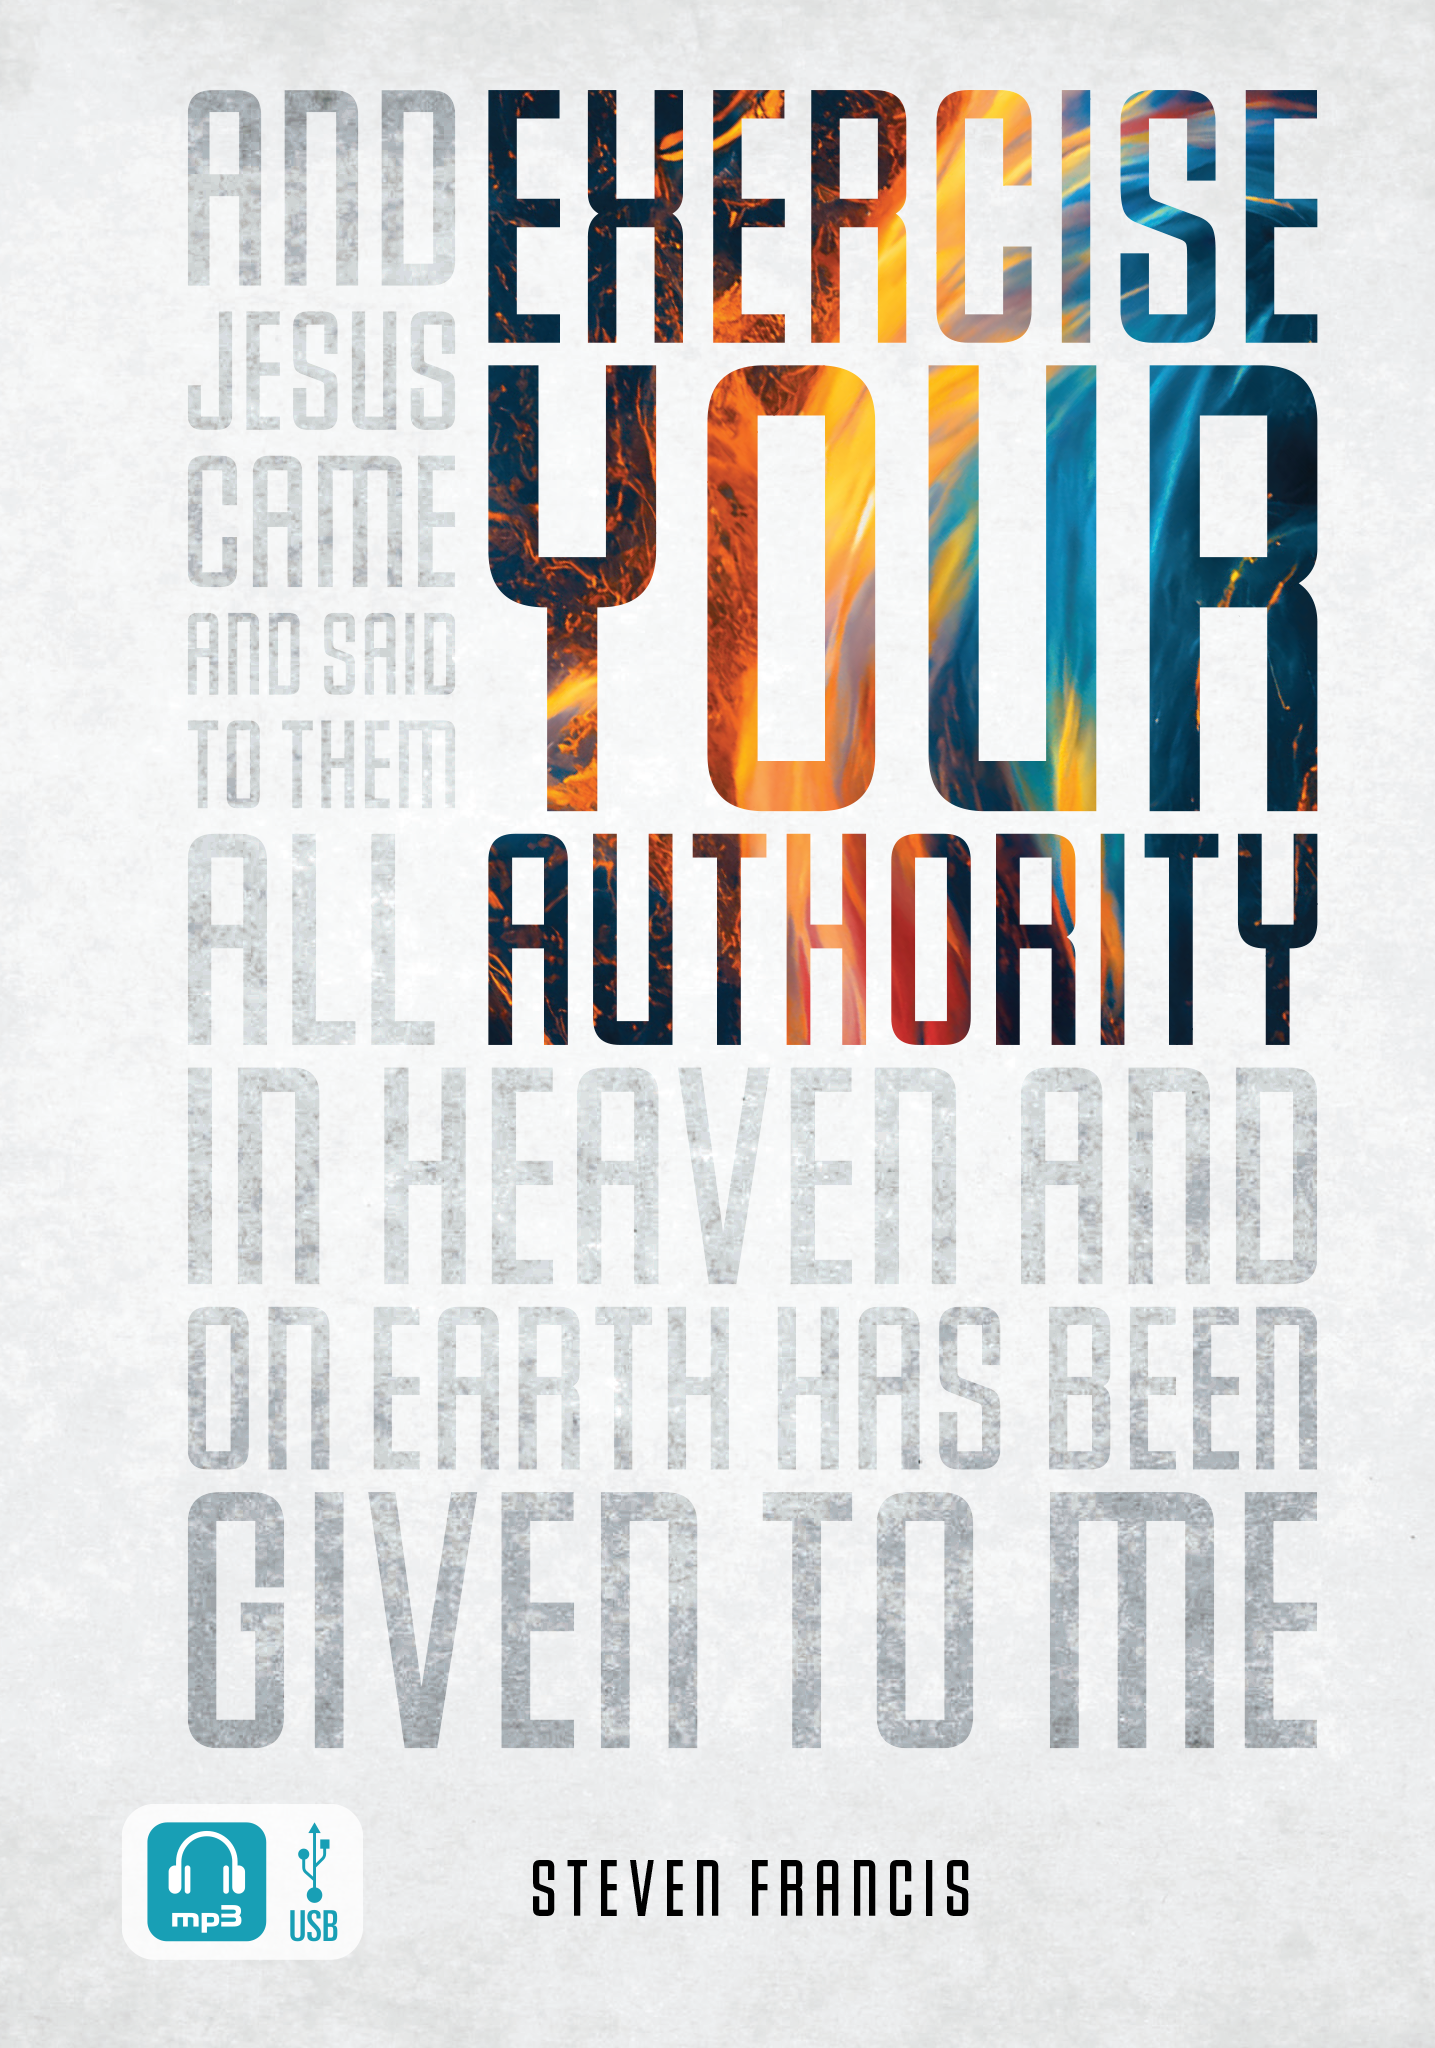 Exercise Your Authority (Digital Audio) - Steven Francis Ministries 